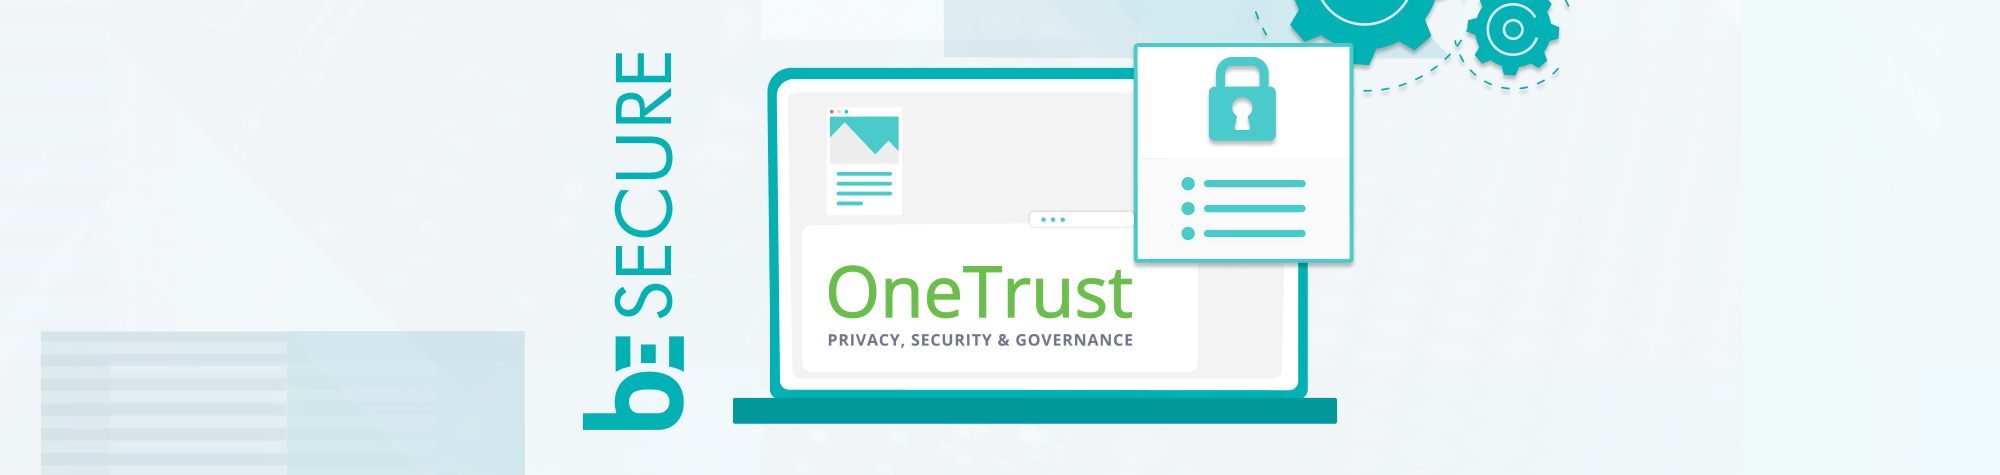 Bcame partners with OneTrust